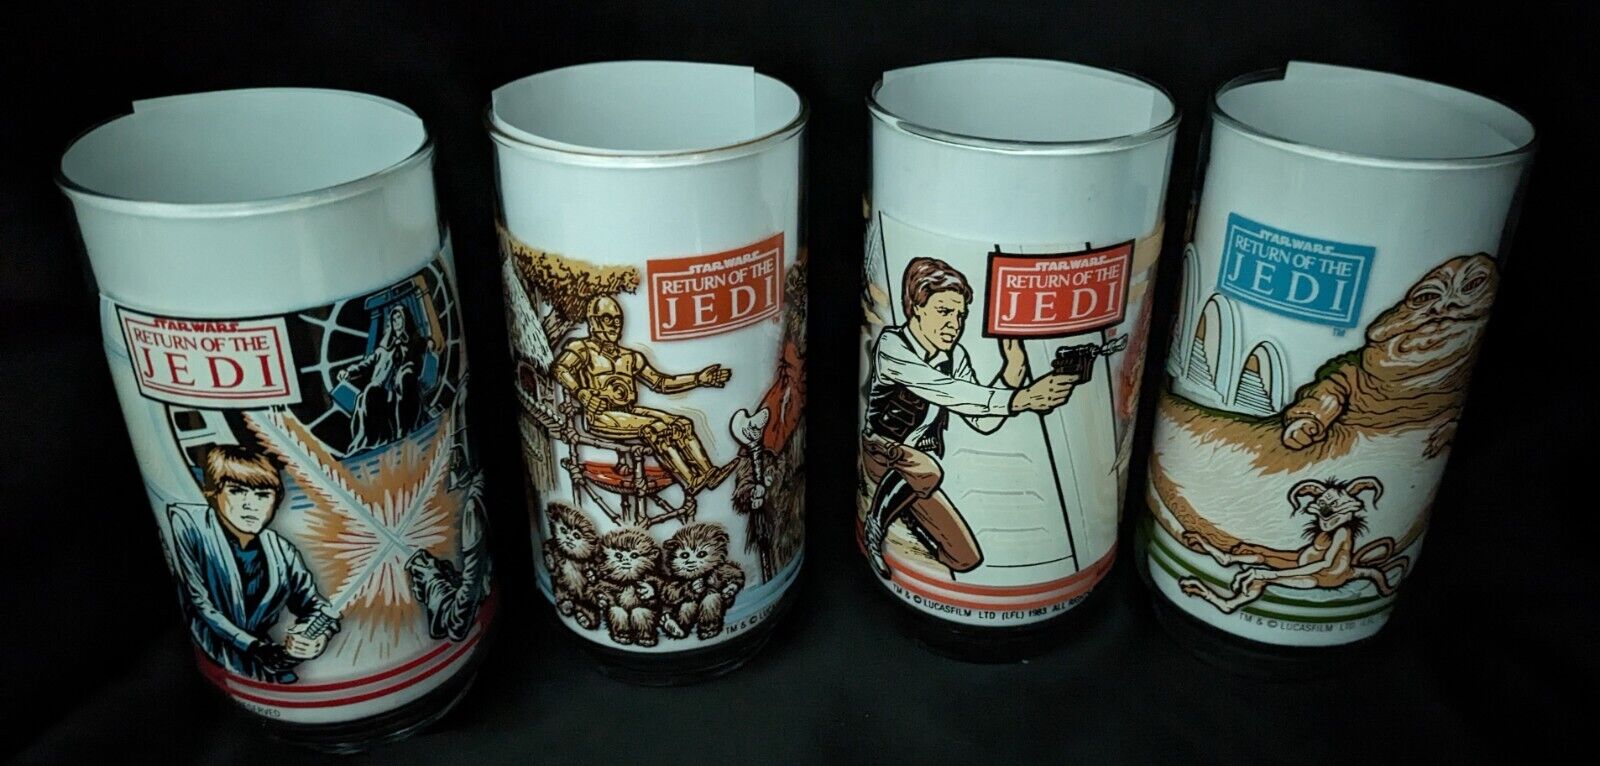 Star Wars Return of the Jedi Vntg 1983 Burger King Glasses All 4 MINT Condition